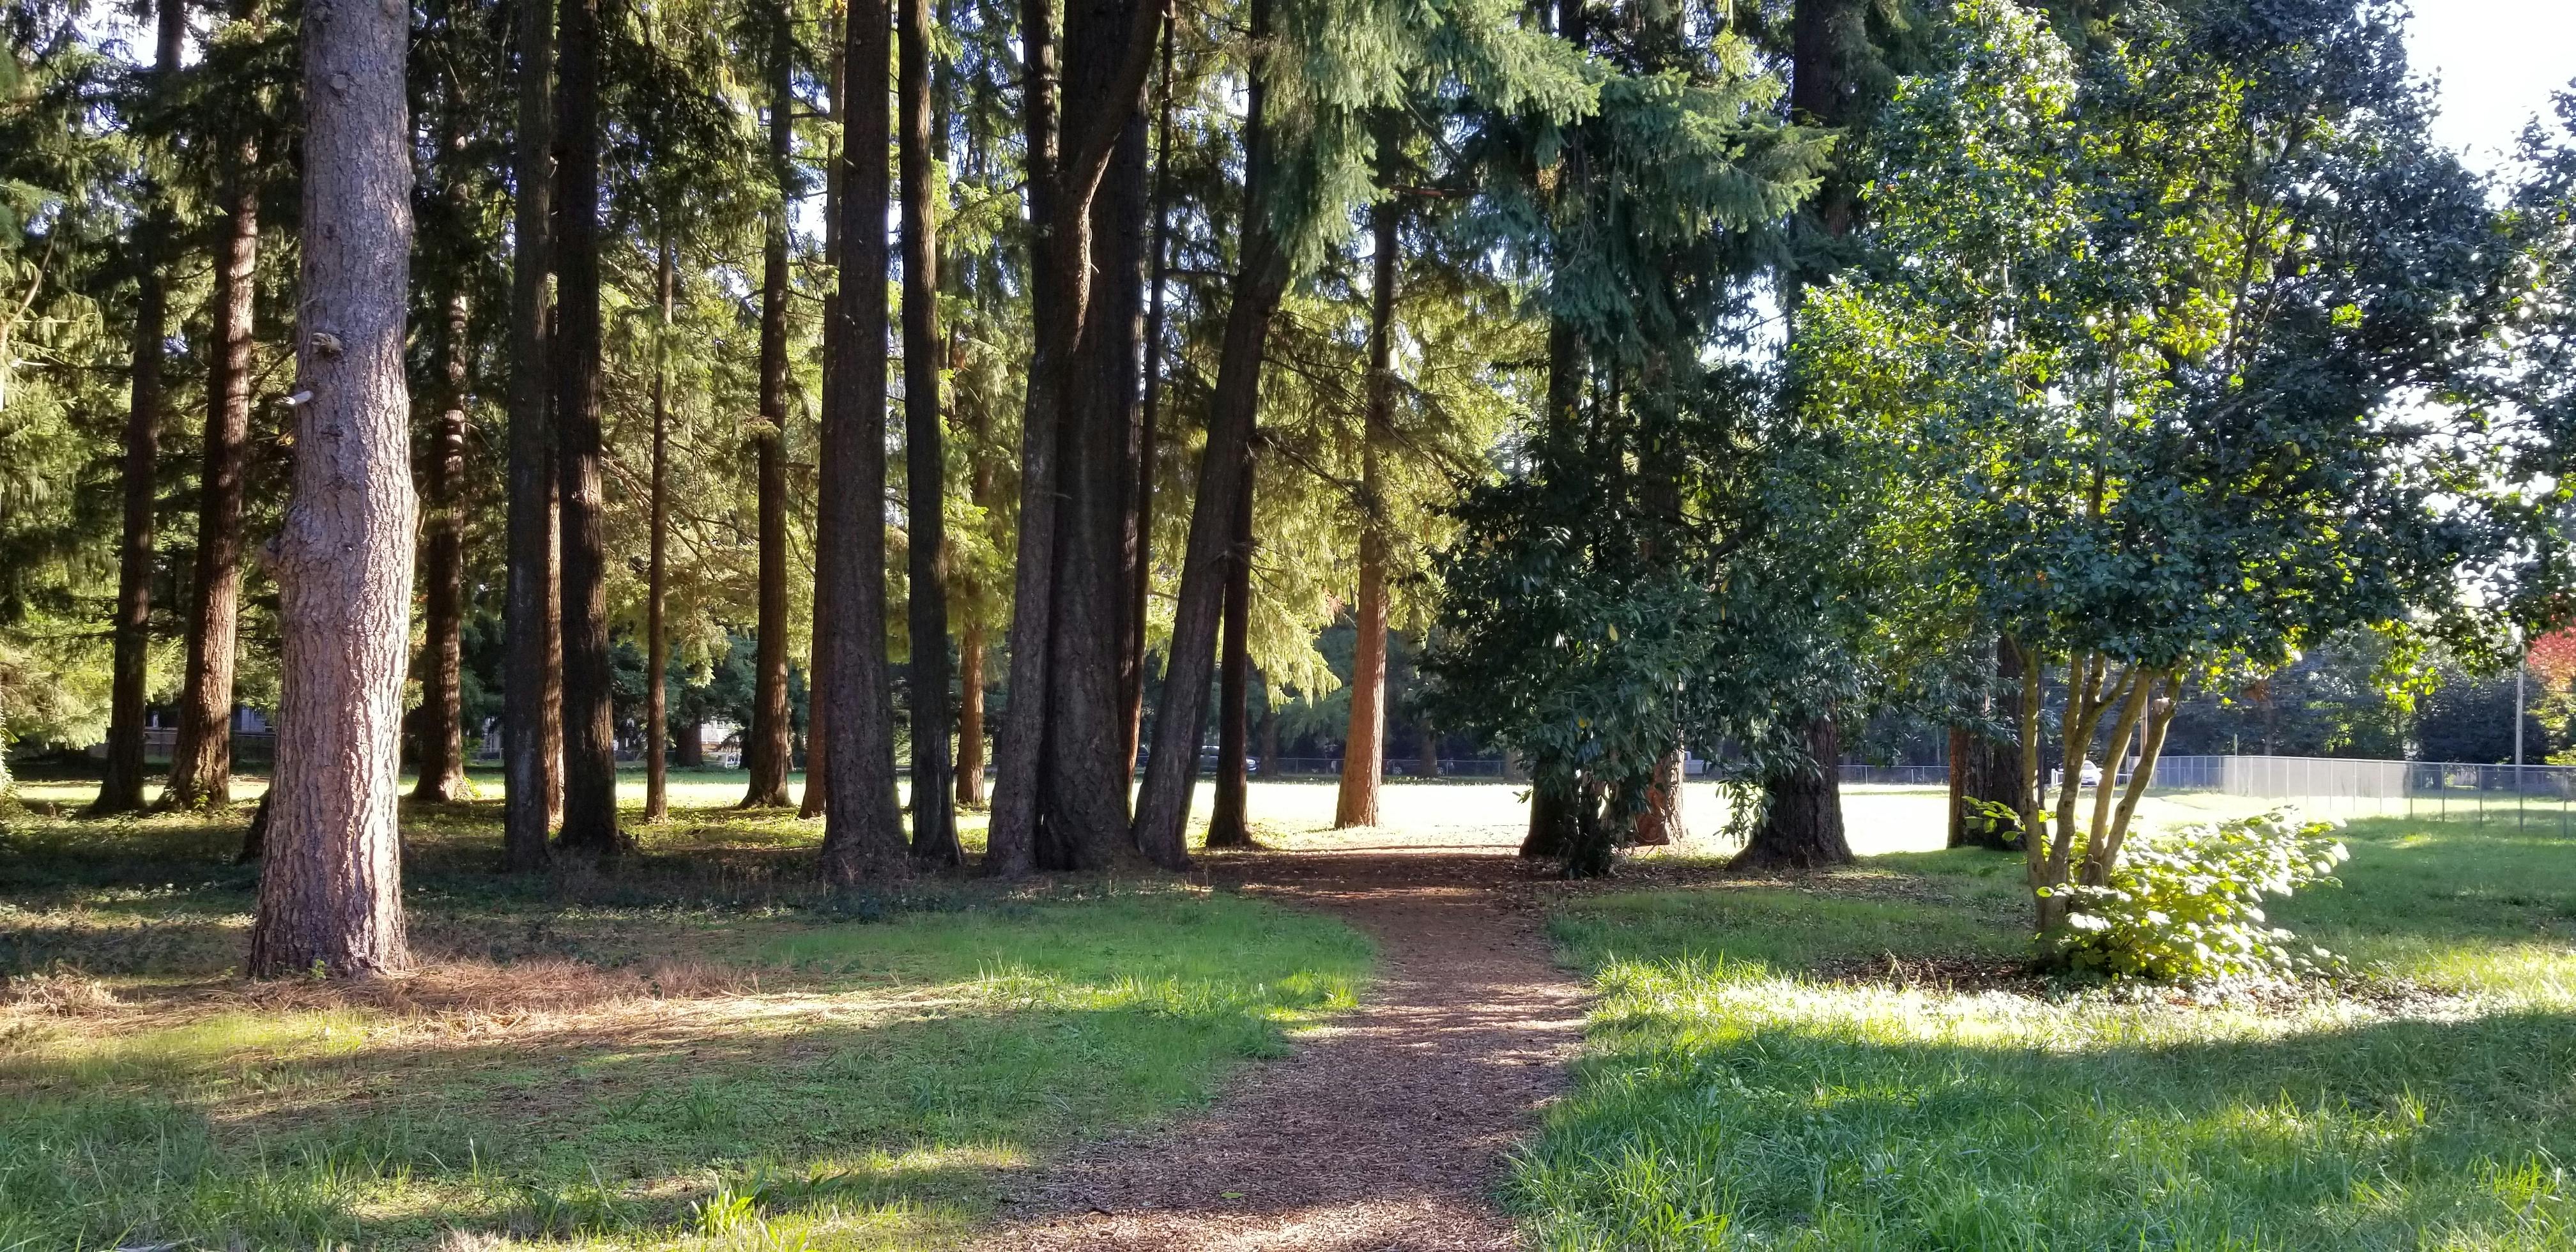 A soft surface trail winds into a tall stand of trees at Shaffer Park